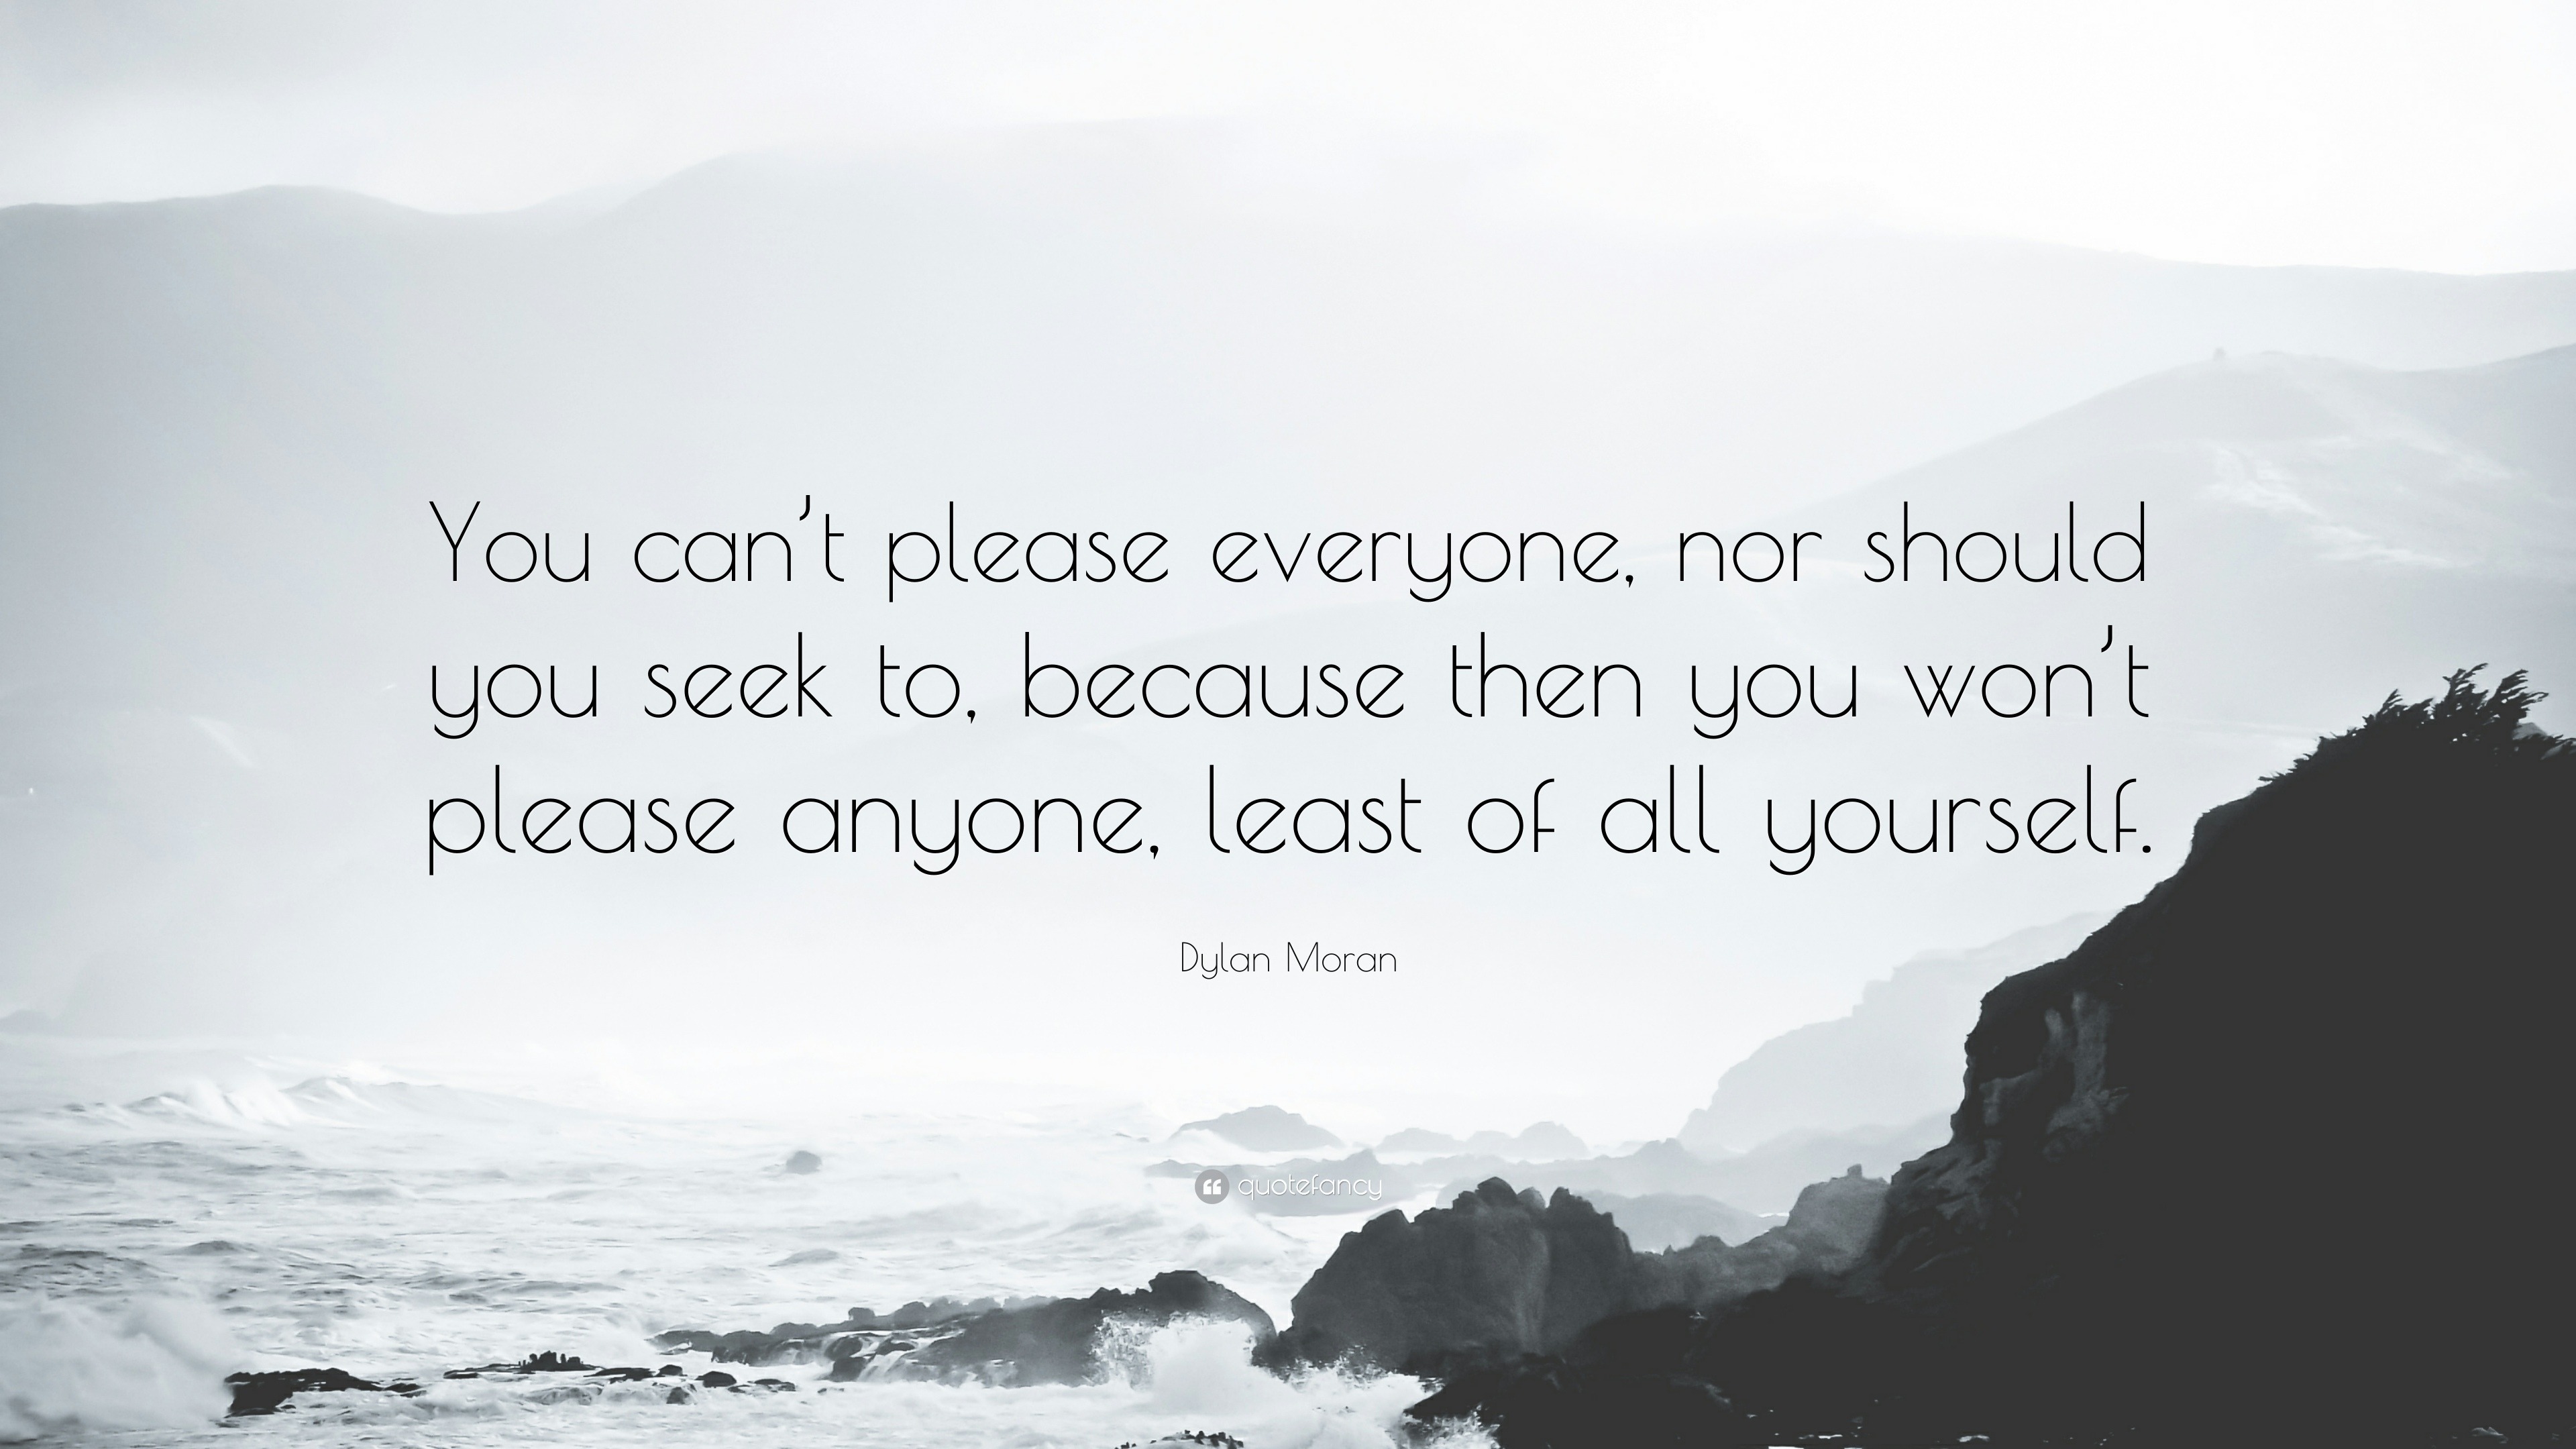 https://quotefancy.com/media/wallpaper/3840x2160/699219-Dylan-Moran-Quote-You-can-t-please-everyone-nor-should-you-seek-to.jpg